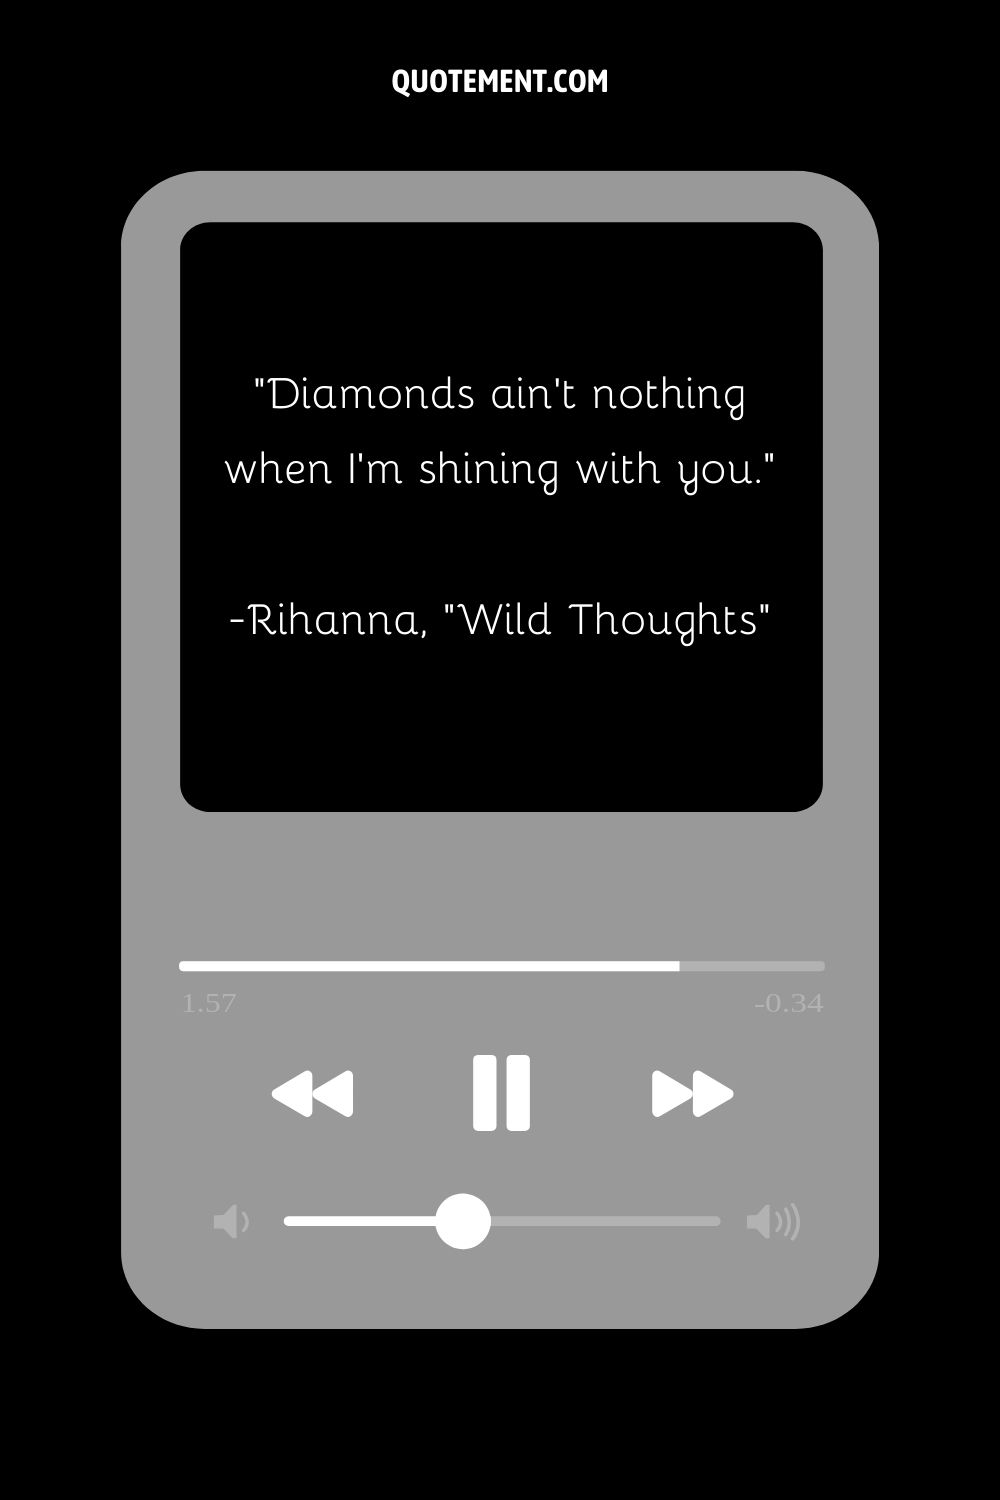 “Diamonds ain’t nothing when I’m shining with you.” — Rihanna, “Wild Thoughts”